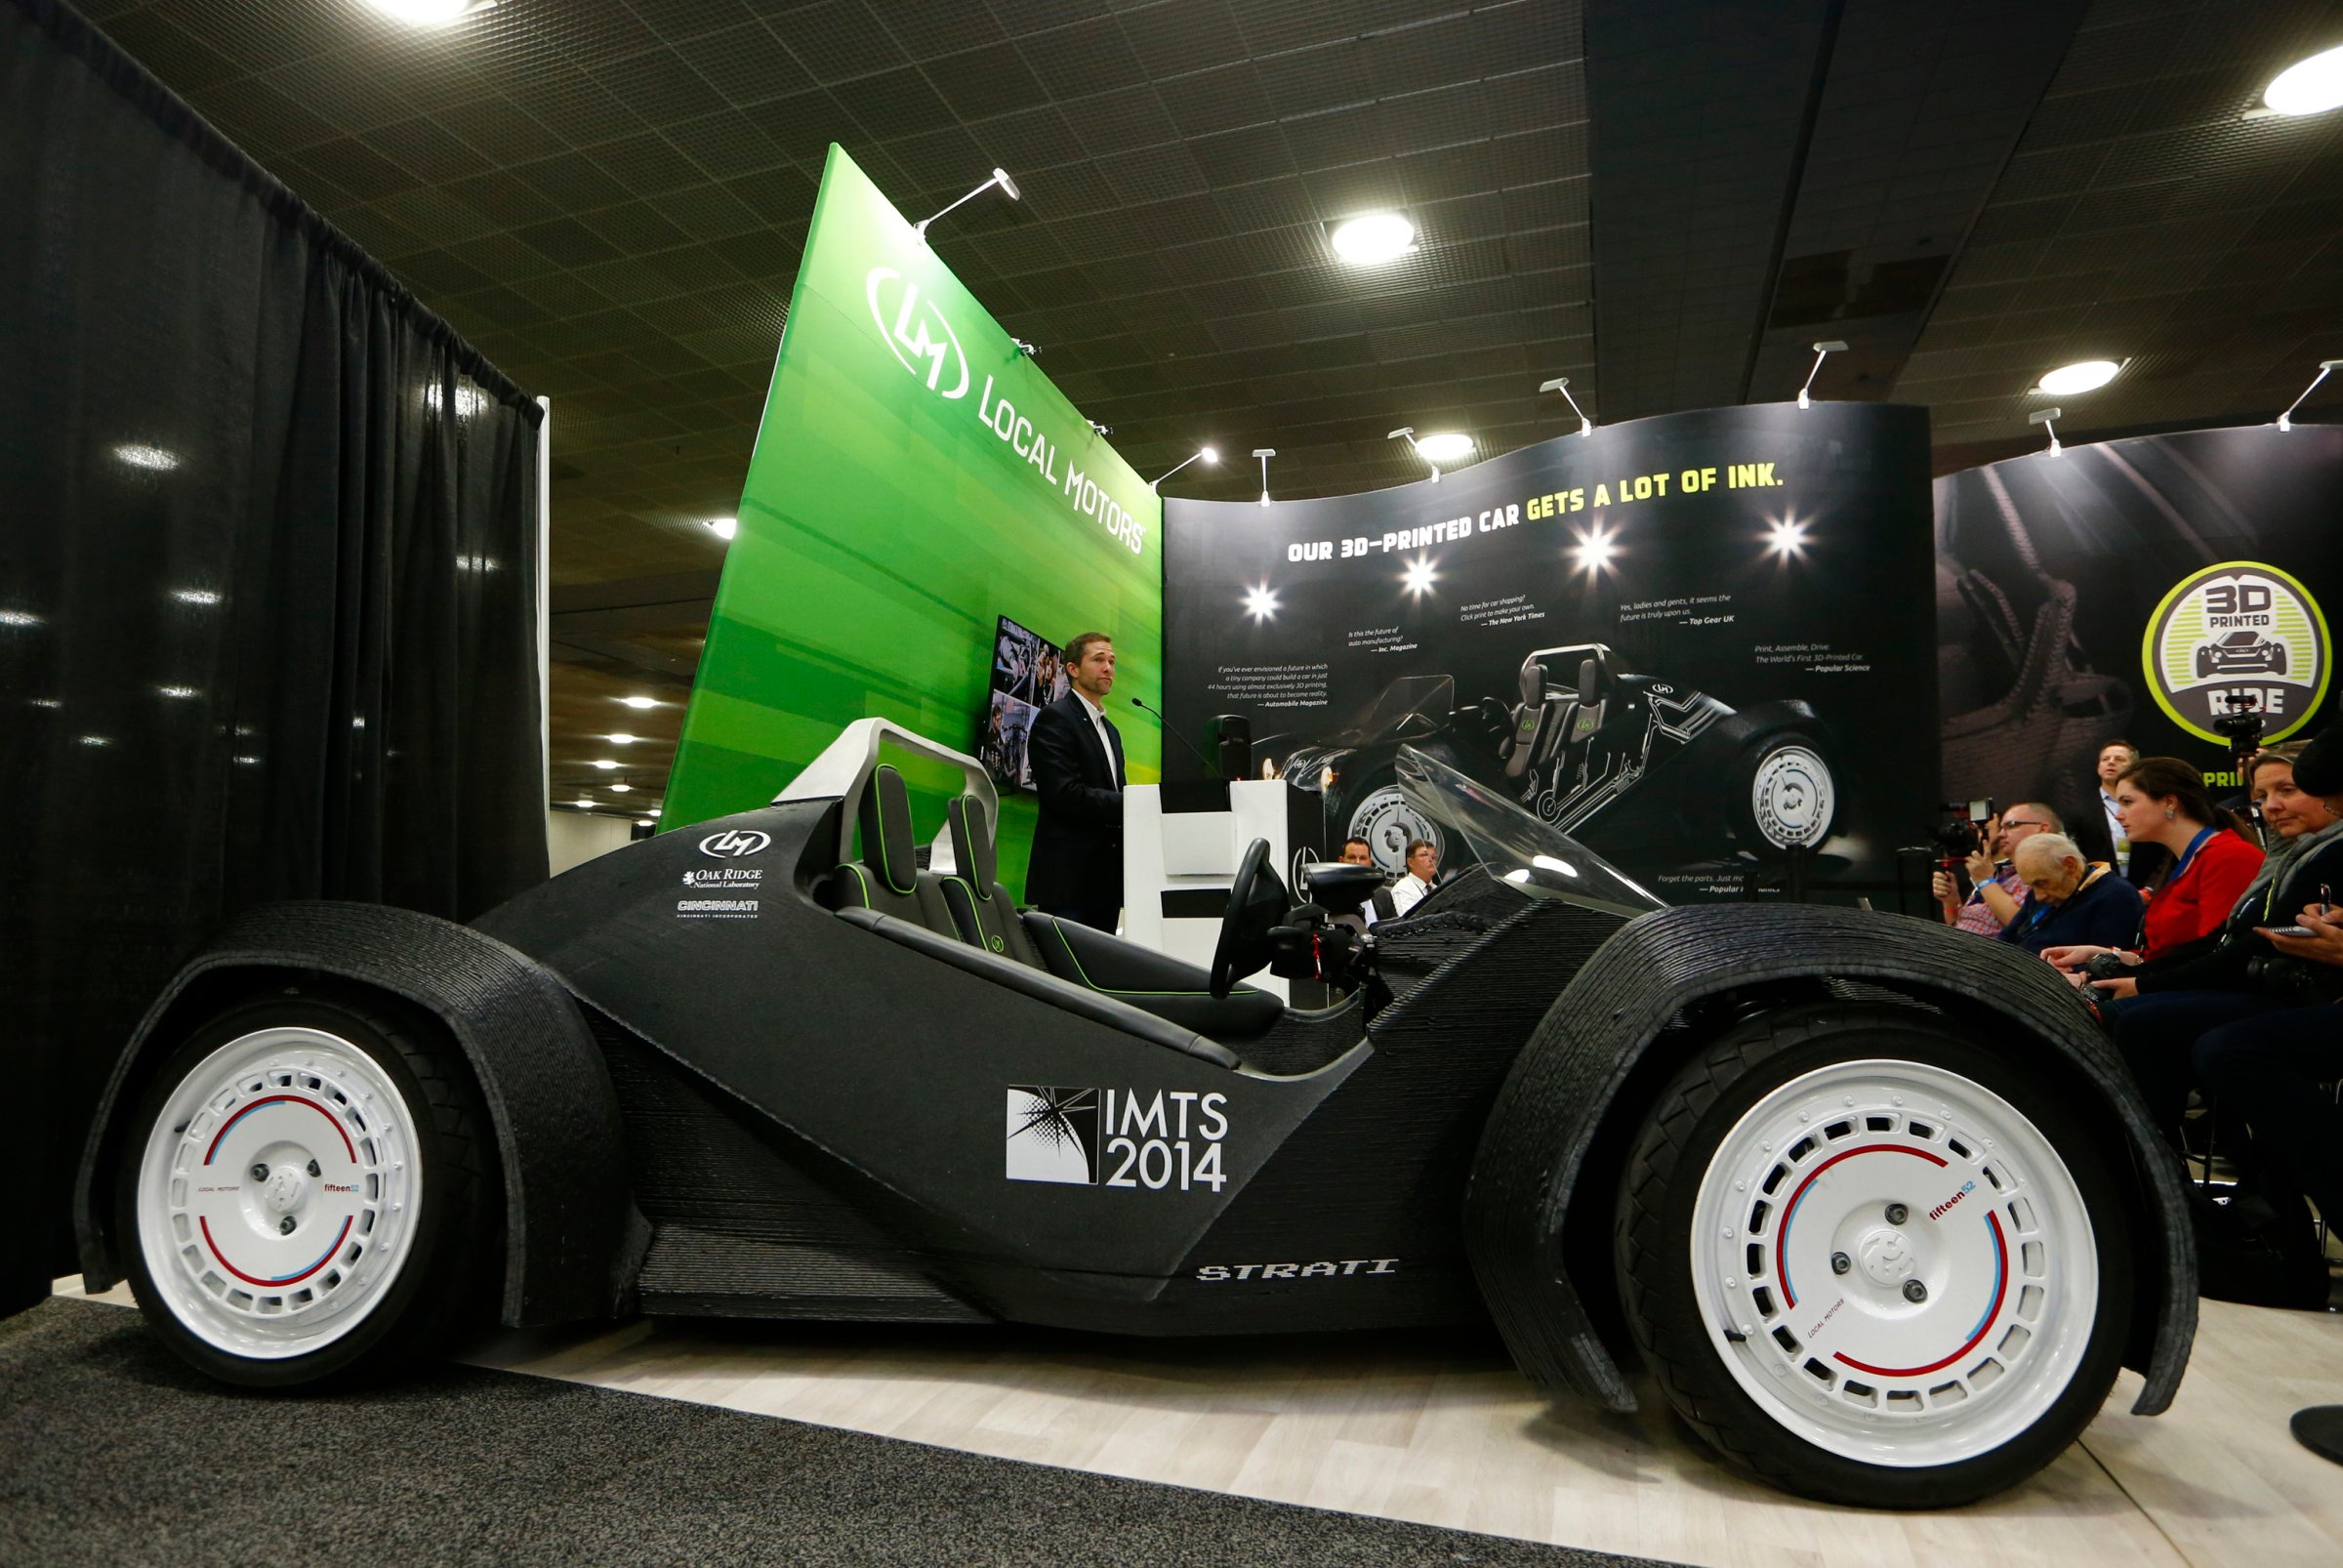 CEO and founder of Local Motors John B. Rogers speaks to the media as his company showcases the world's first 3-D printed car, the Strati, at the Detroit auto show on Jan. 12, 2015.